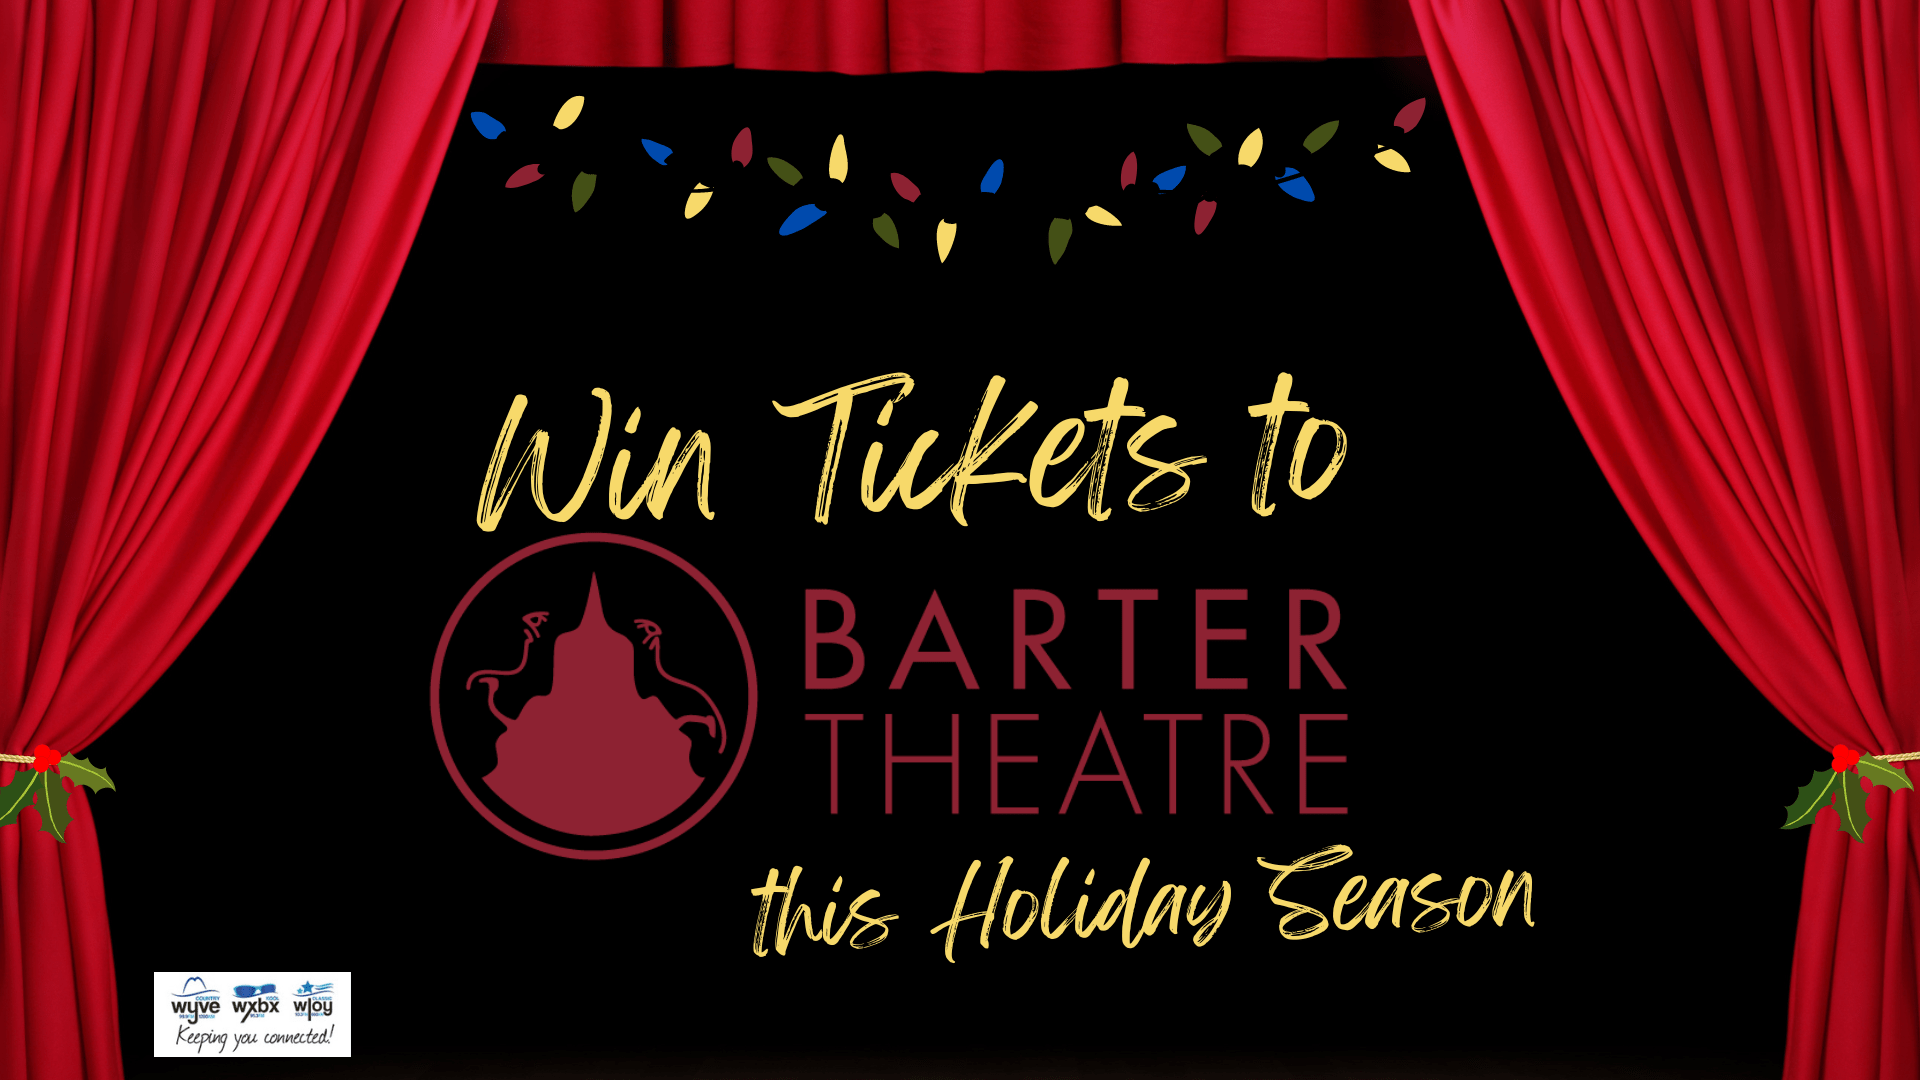 Barter Theatre Tickets Up for Grabs! Three Rivers Media Keeping You